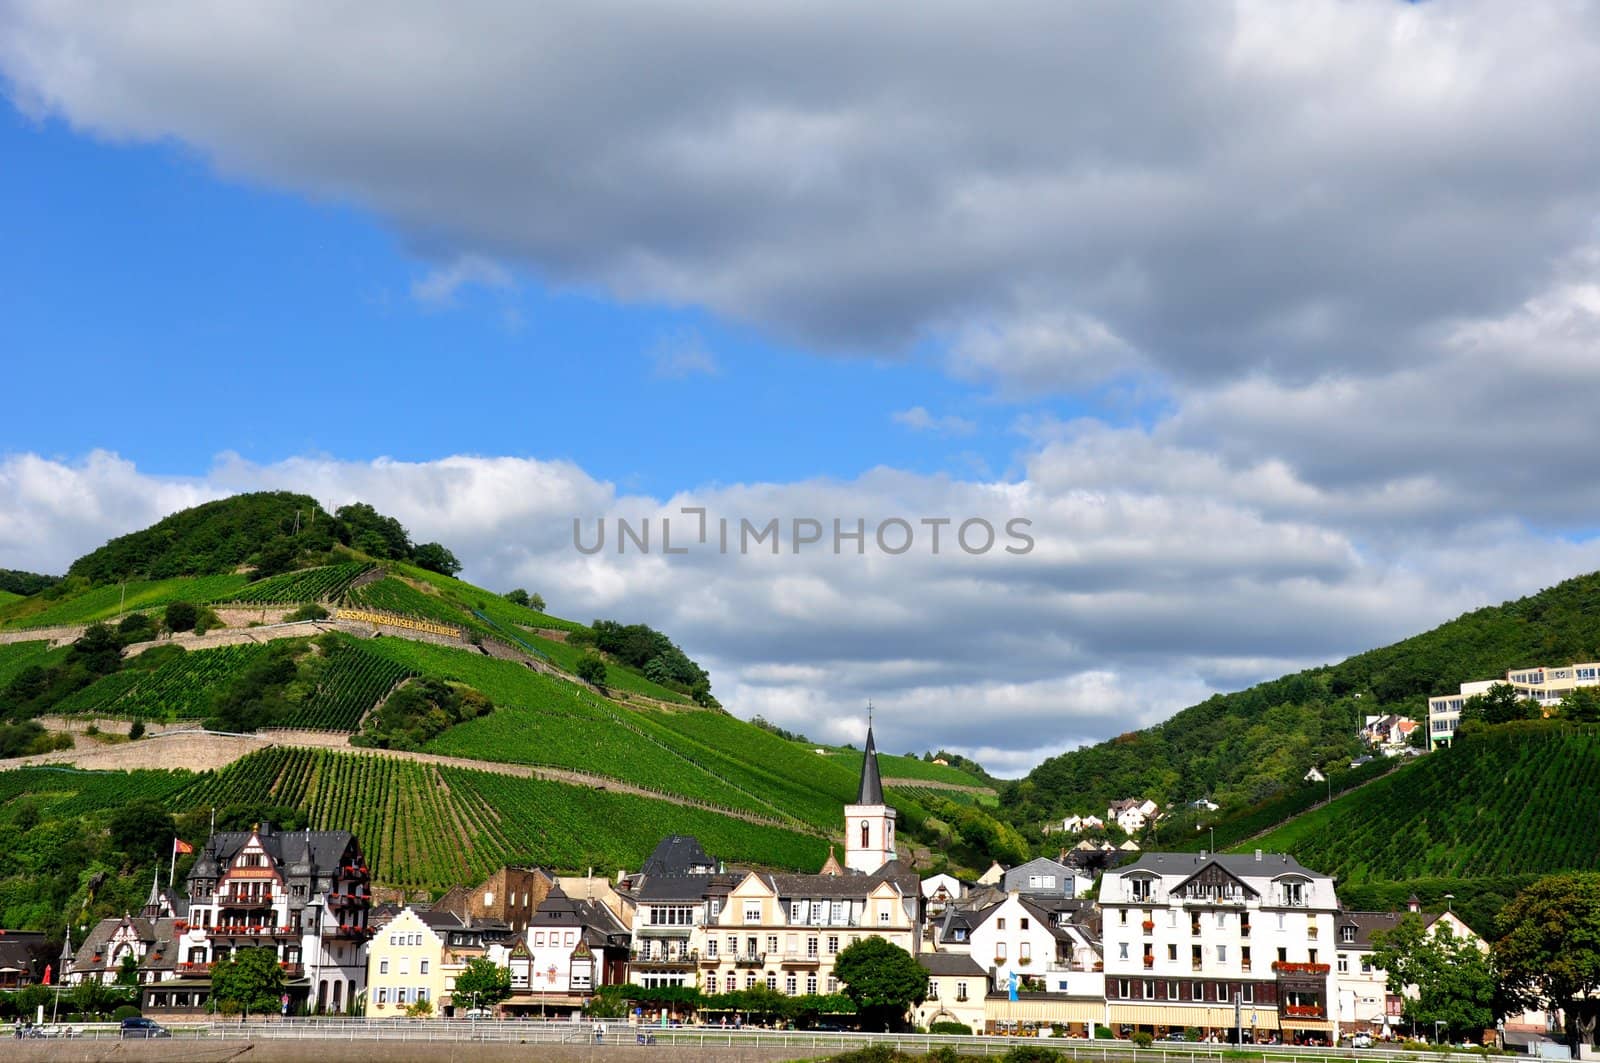 A small town on the bank of the Rhine river.